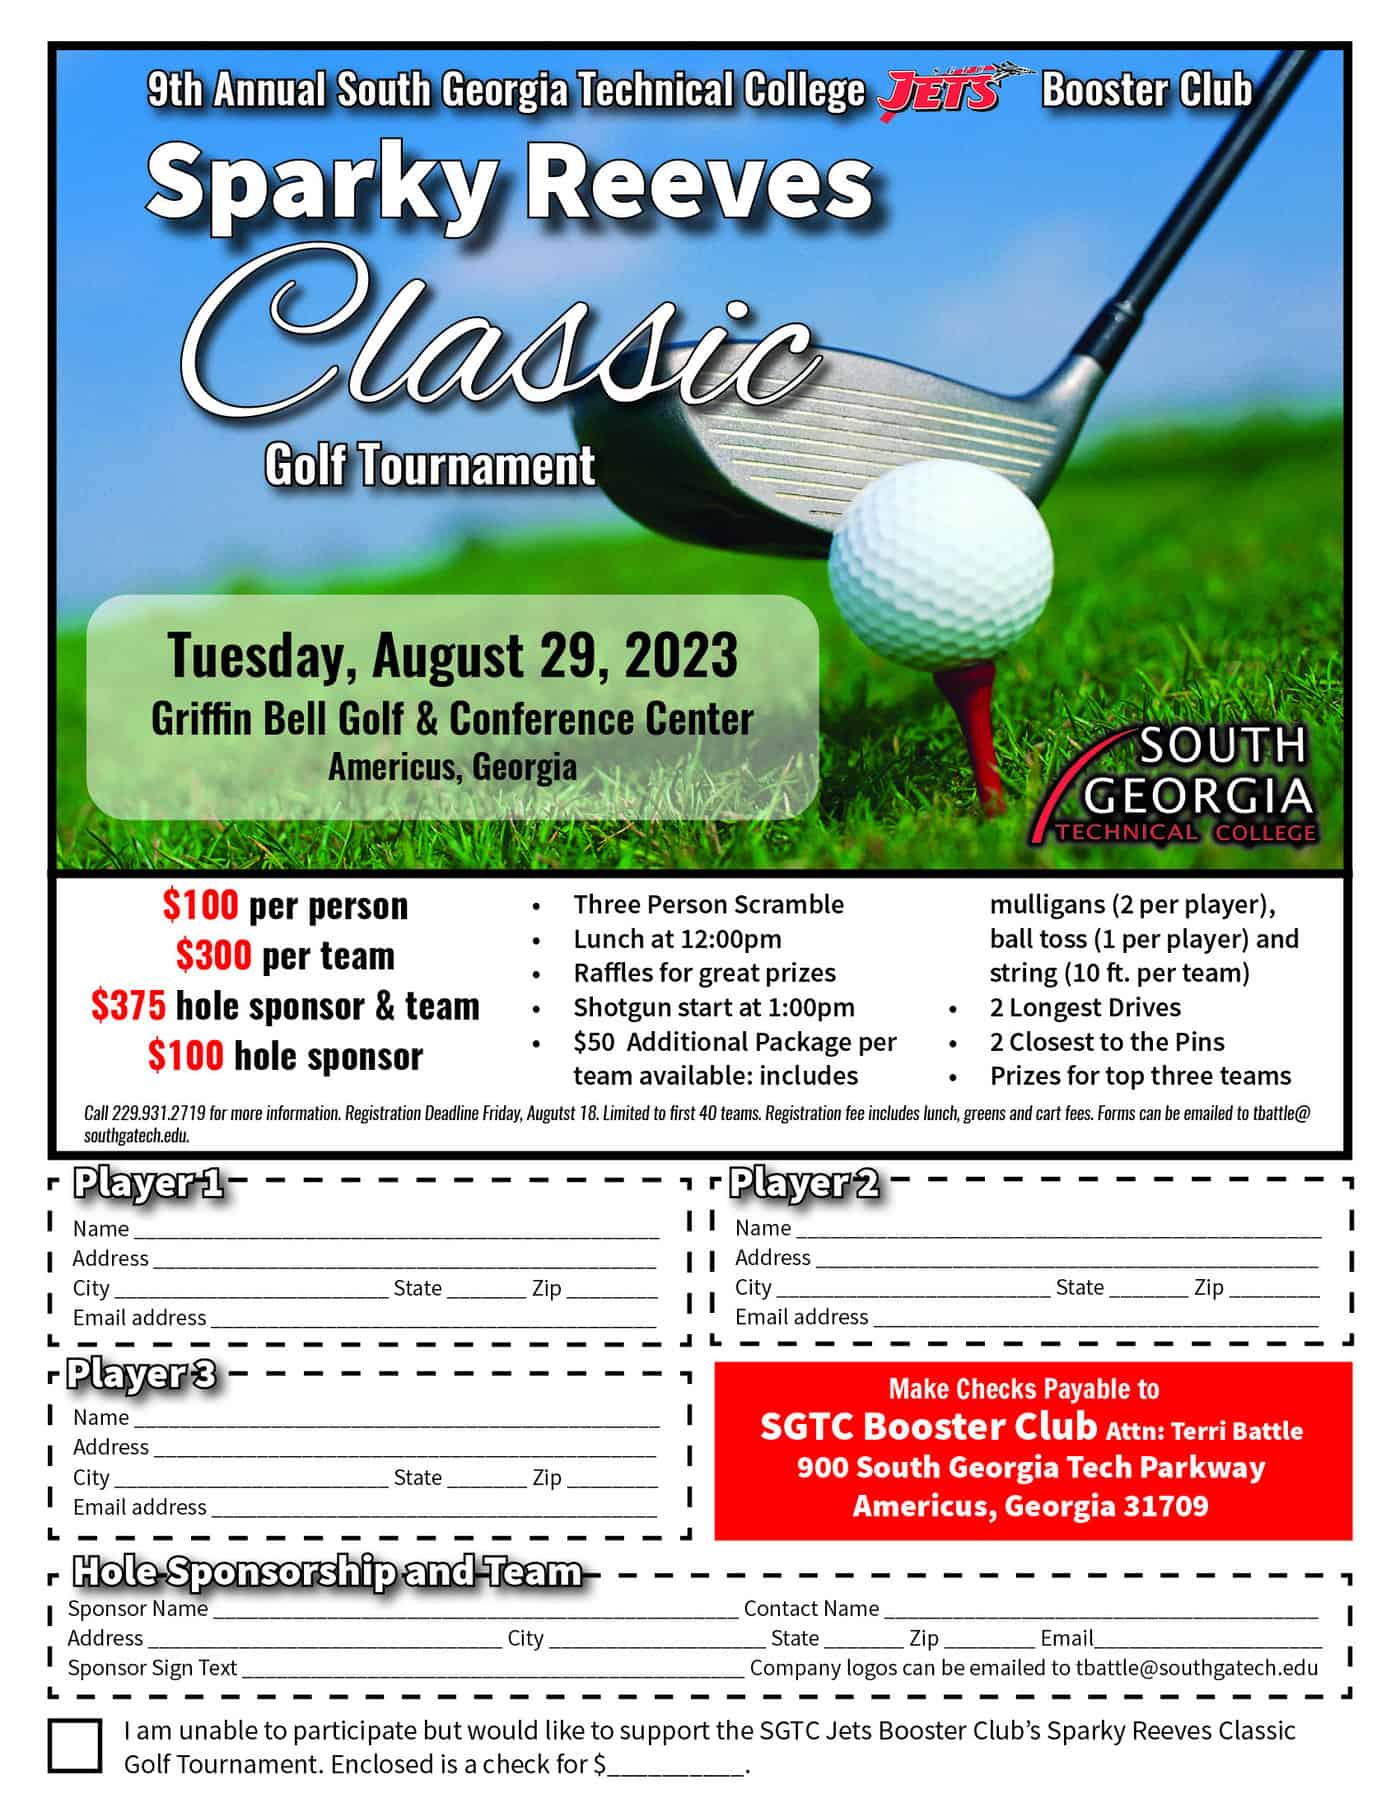 9th annual Sparky Reeves Classic Golf Tournament planned for Tuesday, August 29th.